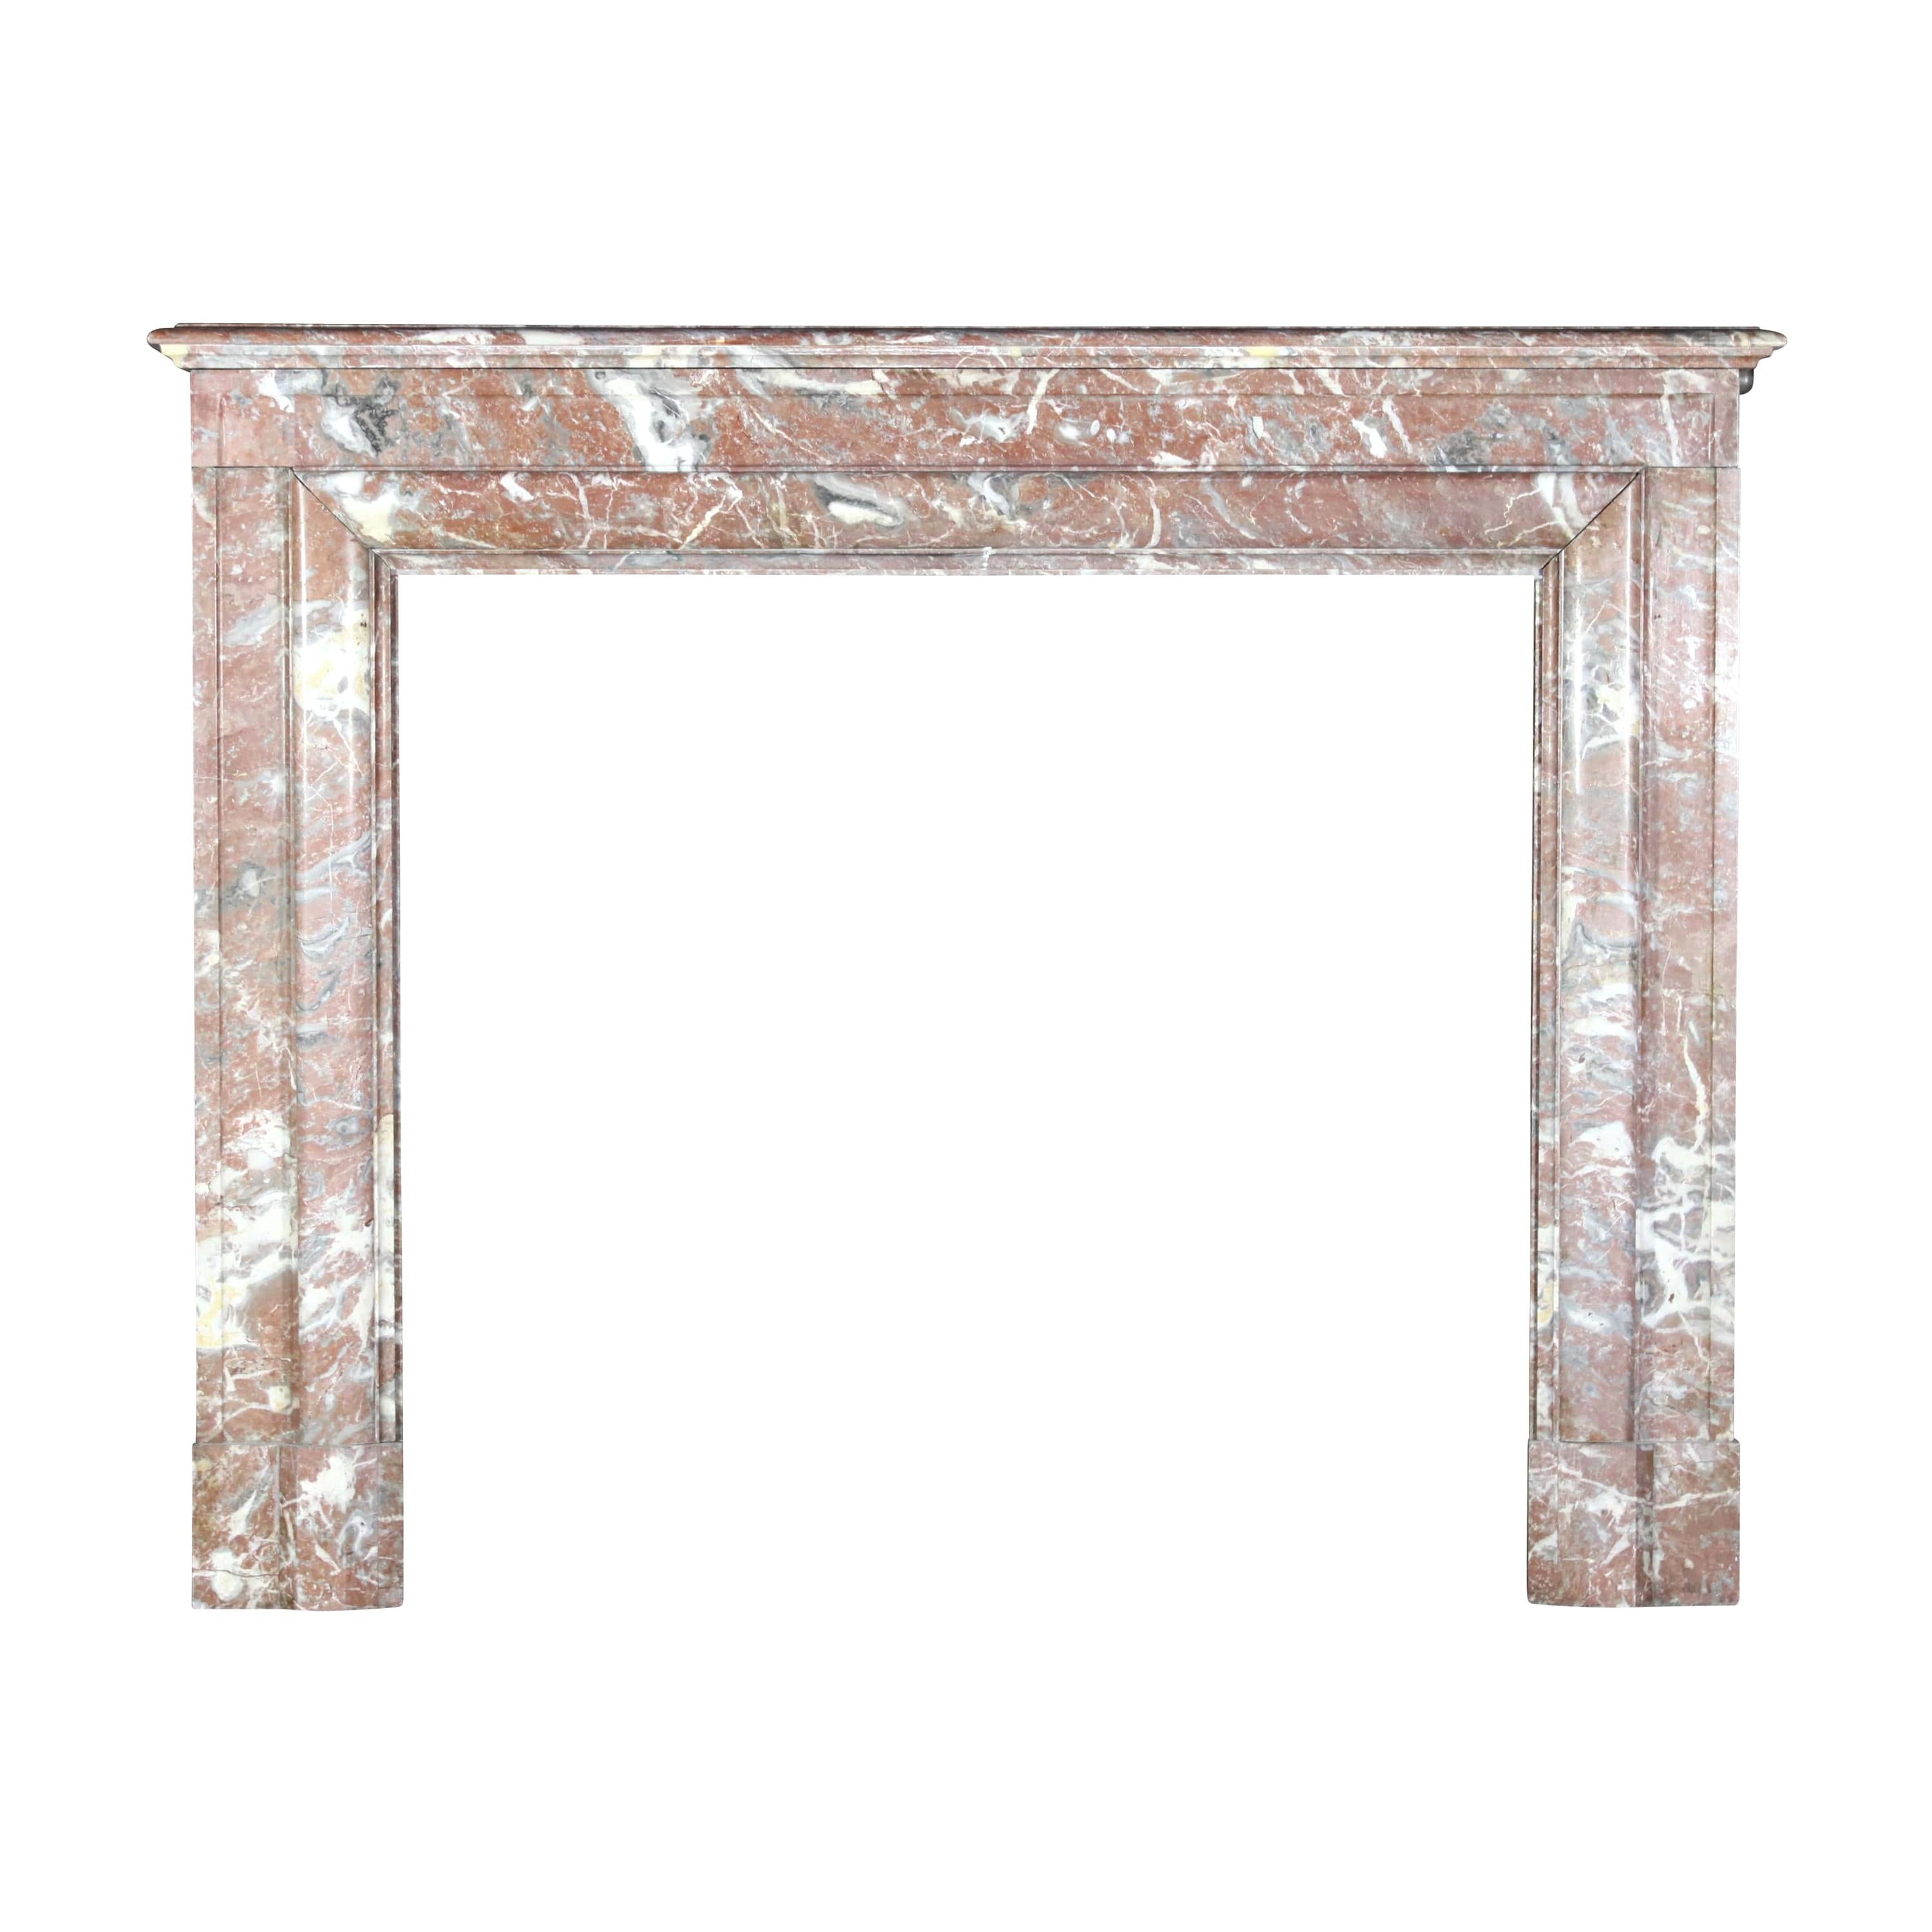 Brown Belgian Marble Timeless Antique Fireplace Surround